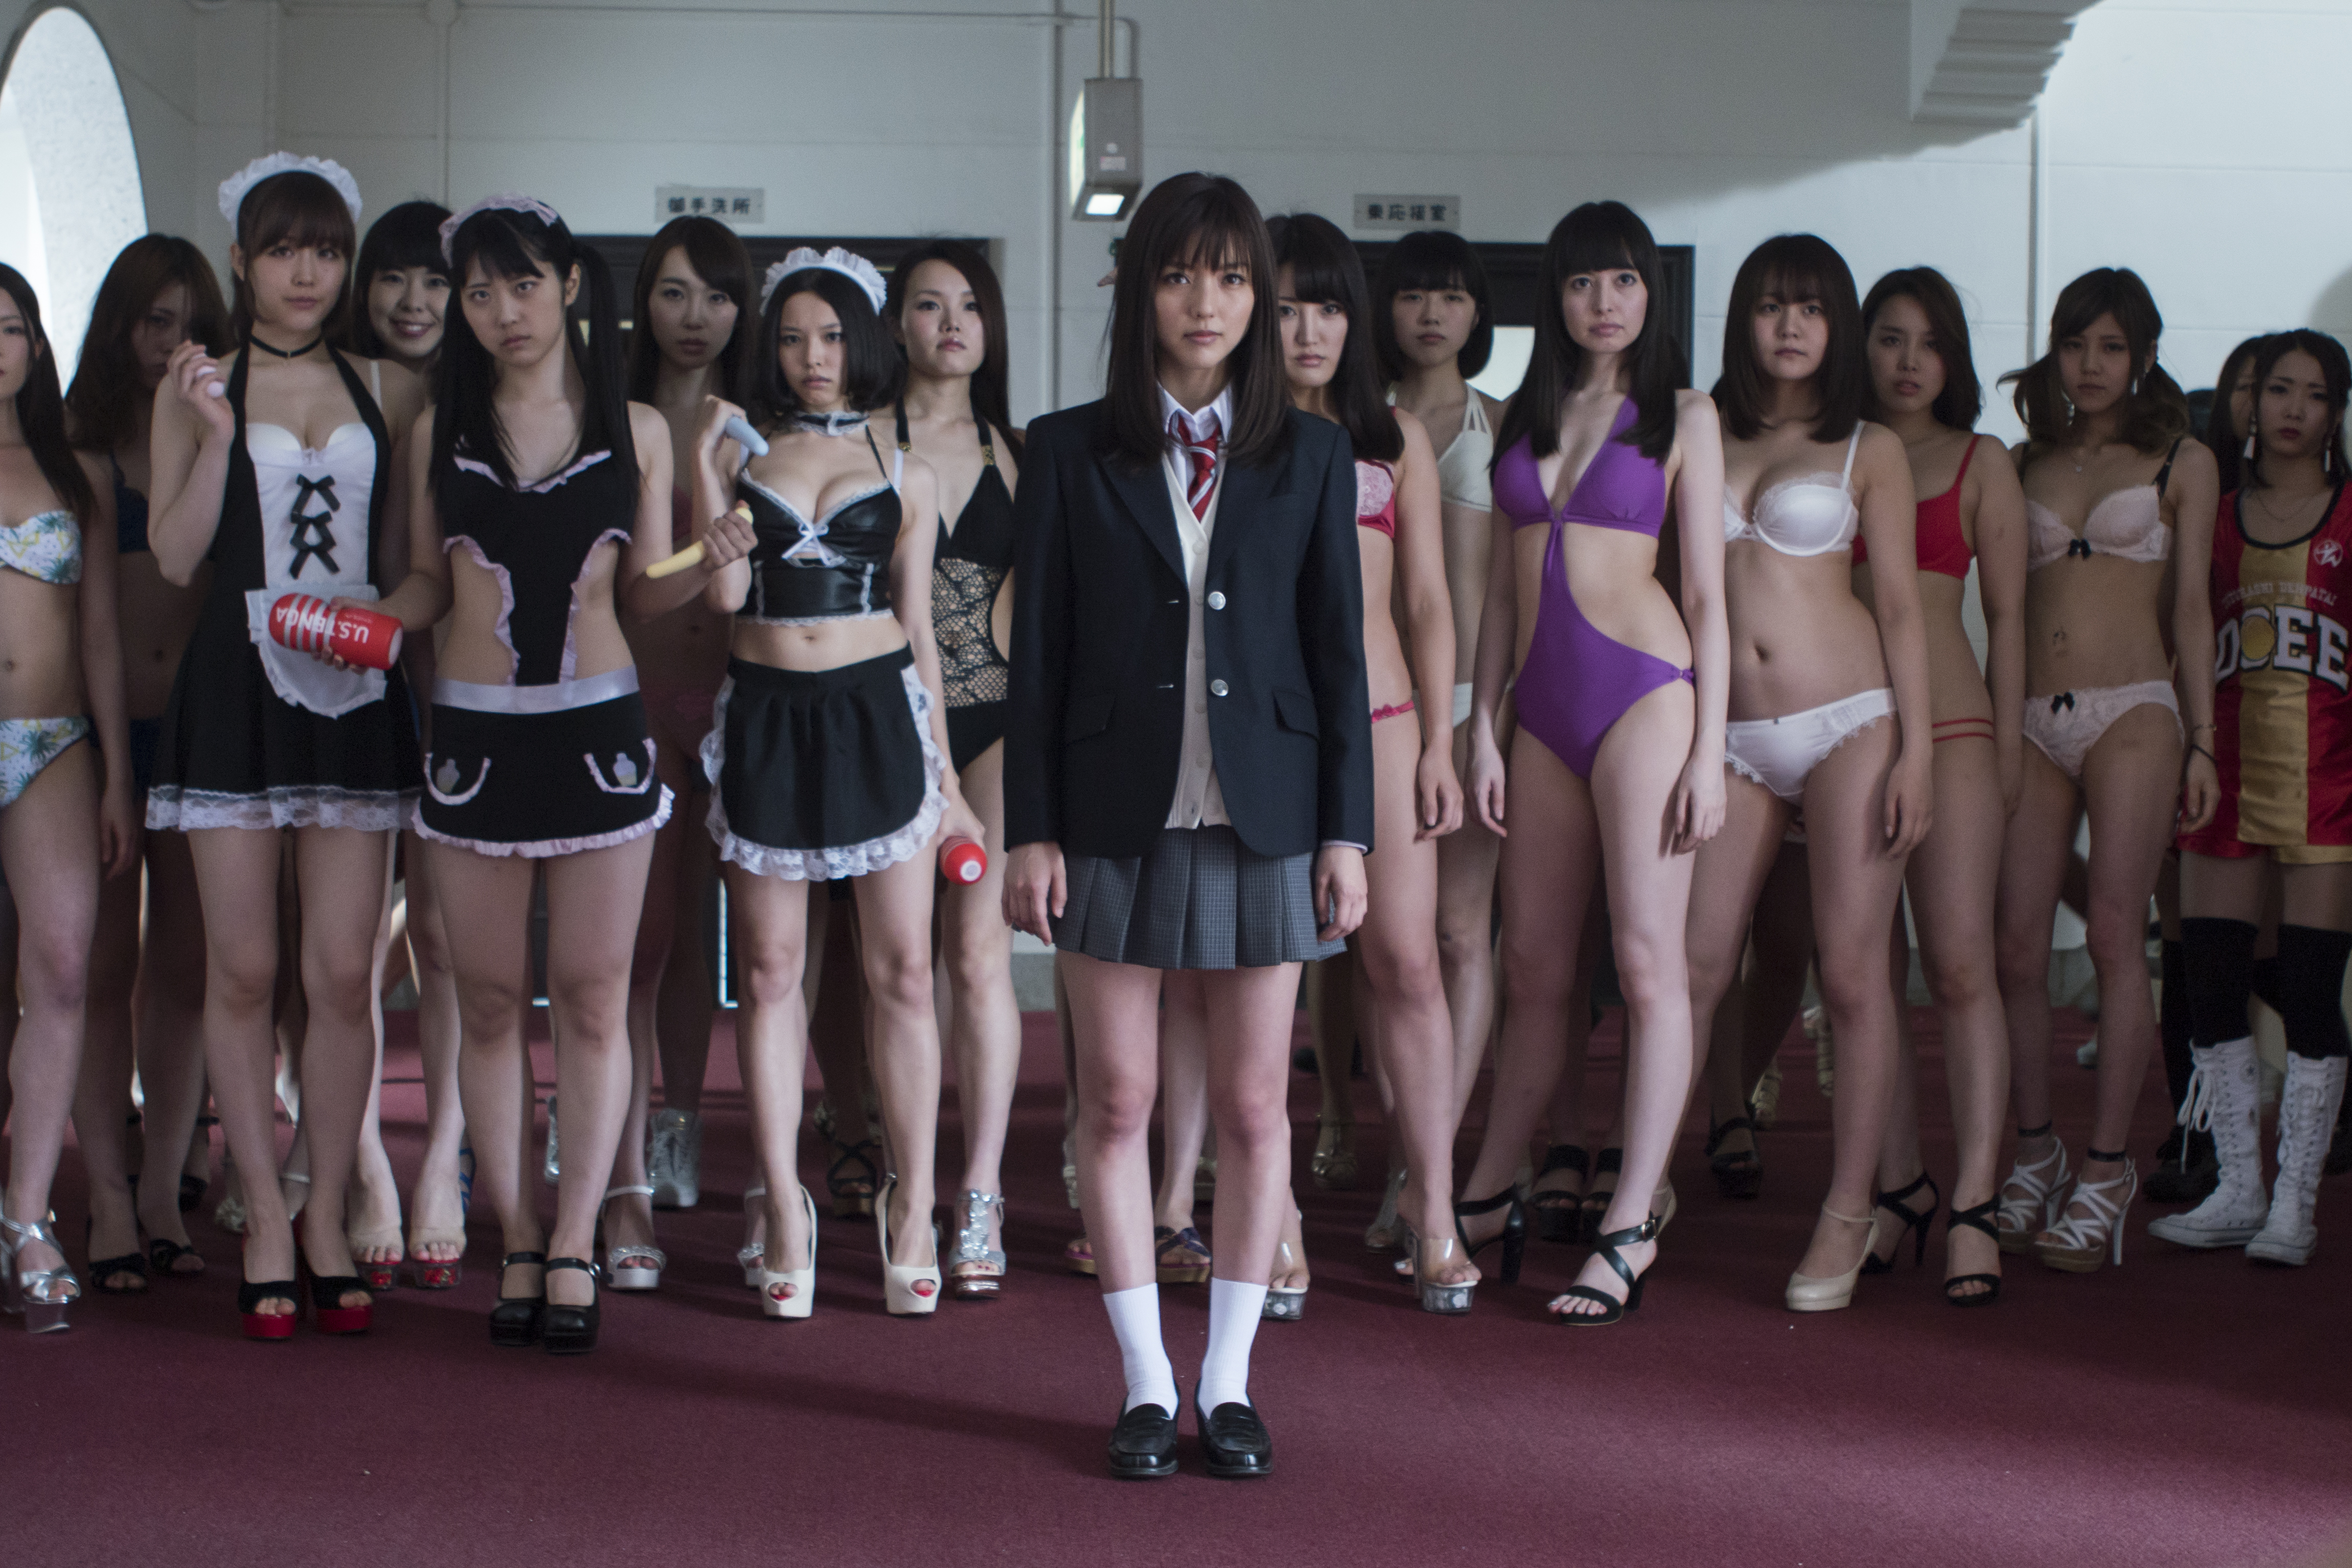 Japan Schoolgirl Sex - Film review: Virgin Psychics â€“ Sion Sono's unapologetically bawdy sex  comedy fails to engage | South China Morning Post